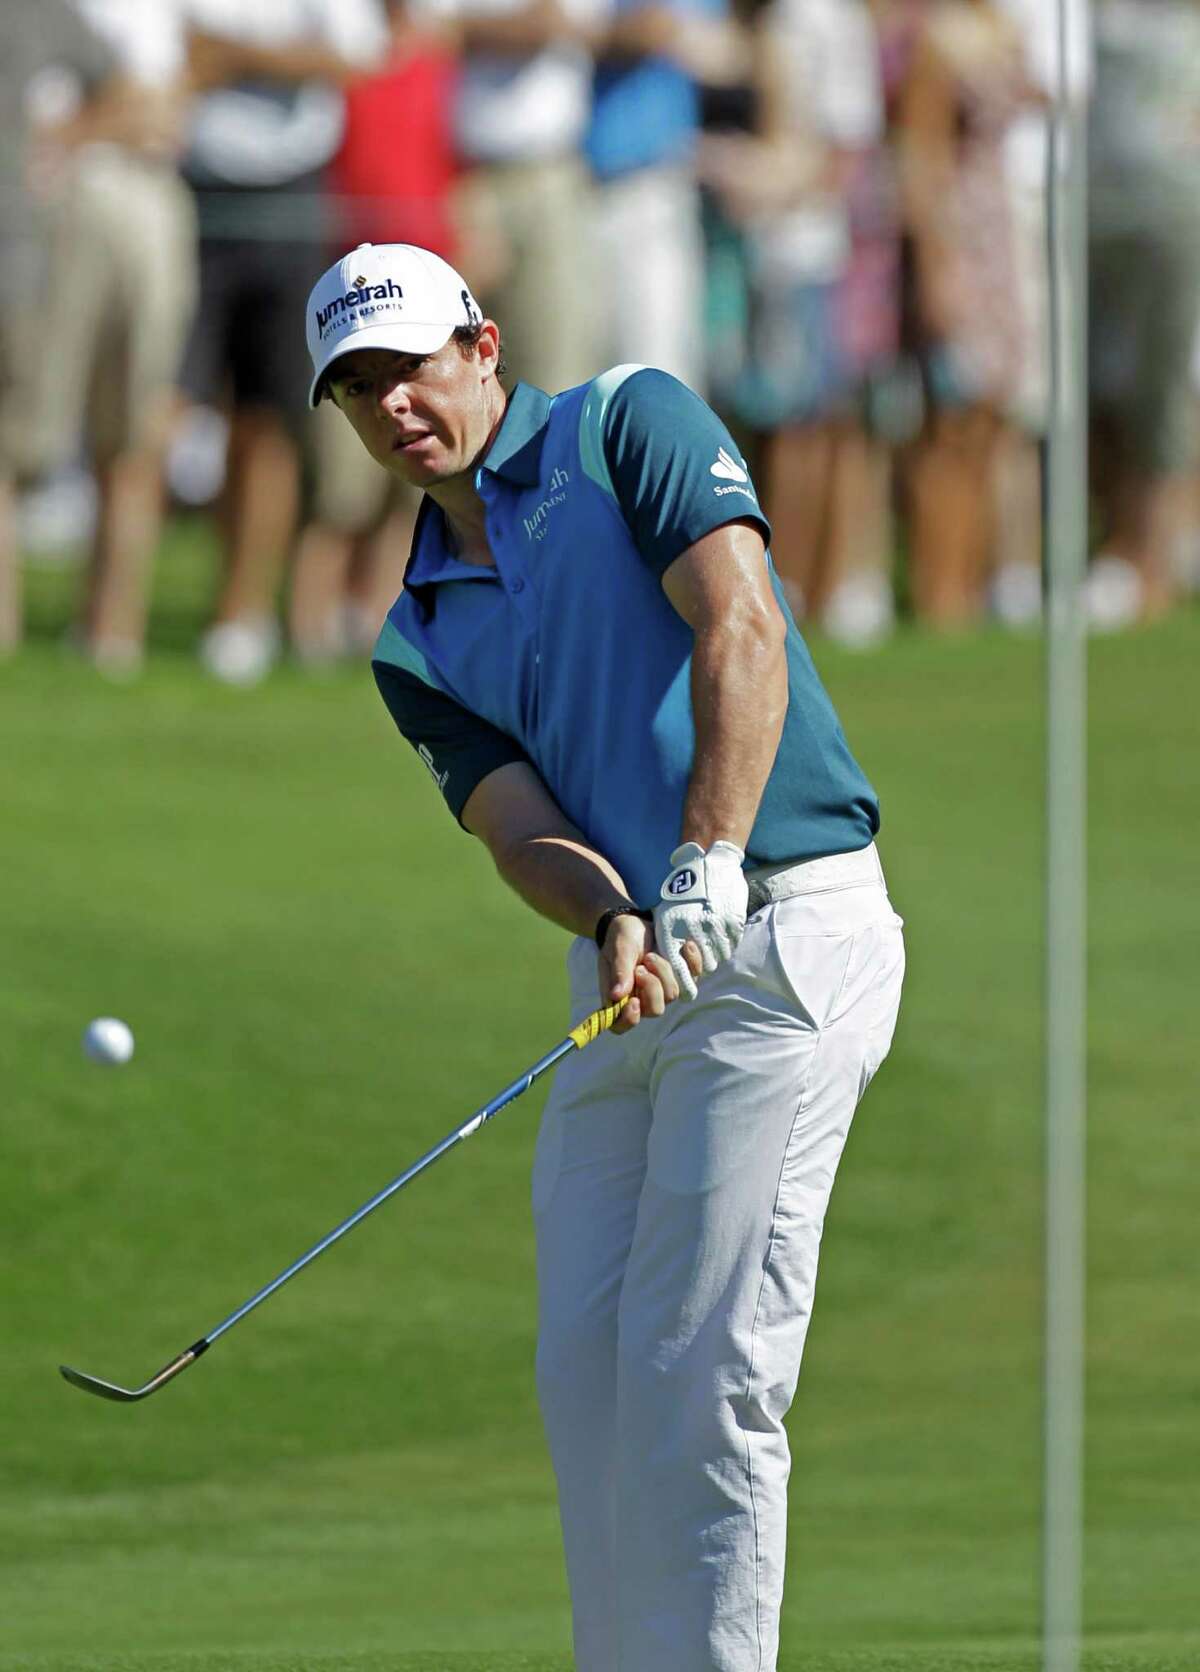 Rory McIlroy, of Northern Ireland, watches his chip to the 14th green during the second round of the Players Championship golf tournament at TPC Sawgrass, Friday, May 11, 2012, in Ponte Vedra Beach, Fla. (AP Photo/Chris O'Meara)